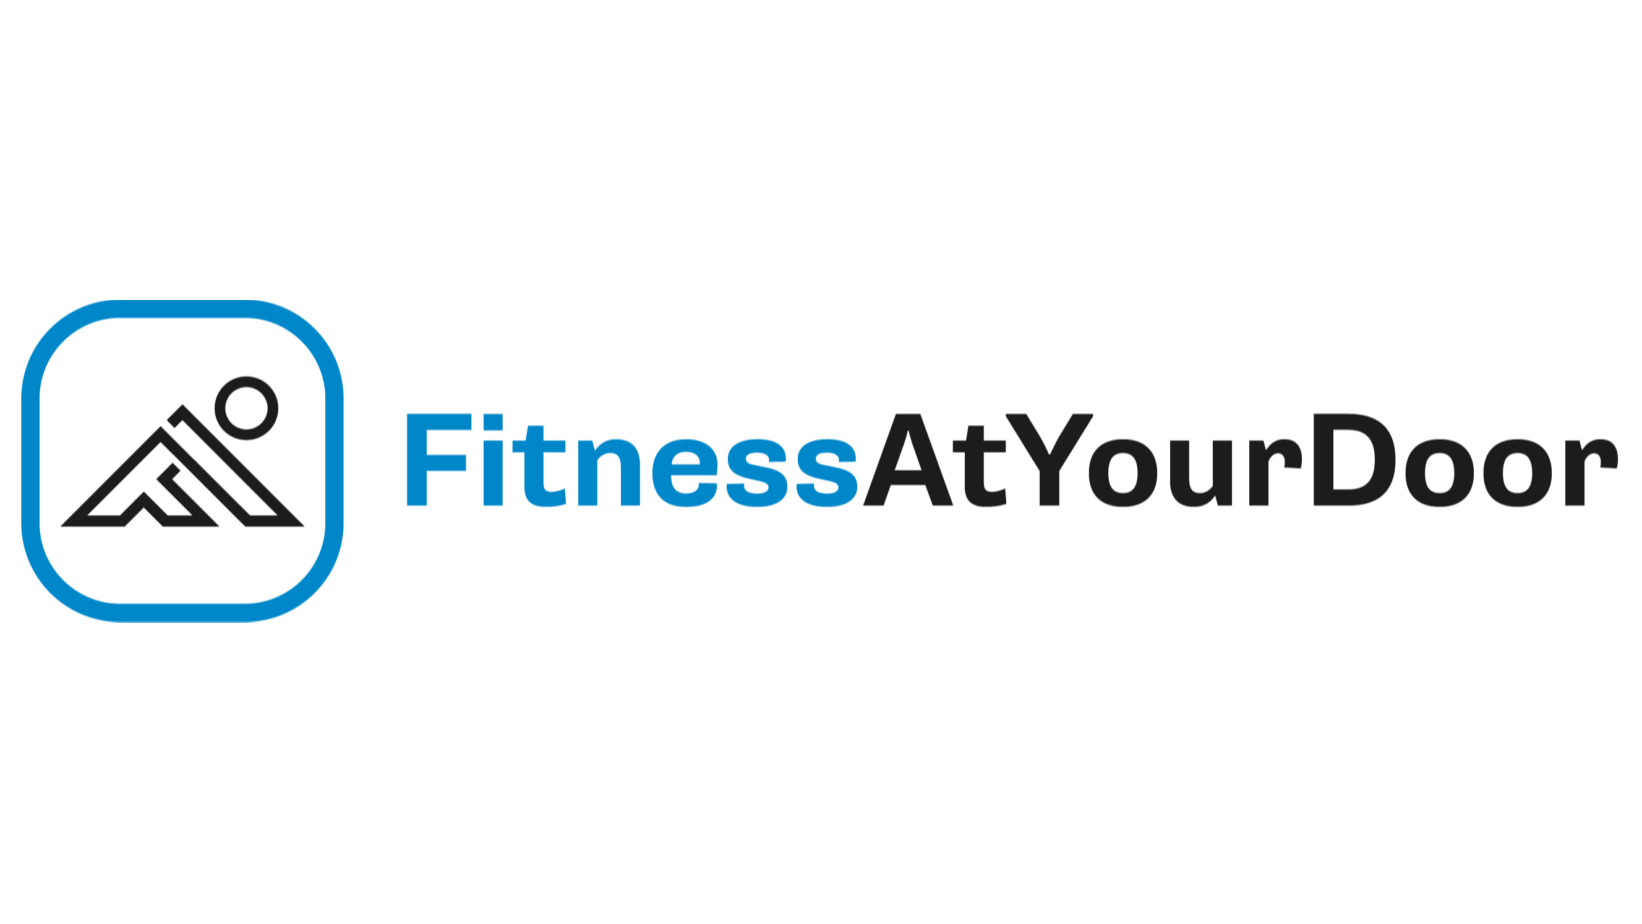 Bring Expert Fitness Coaches To Your Door In Palm Beach Gardens & Lose Weight